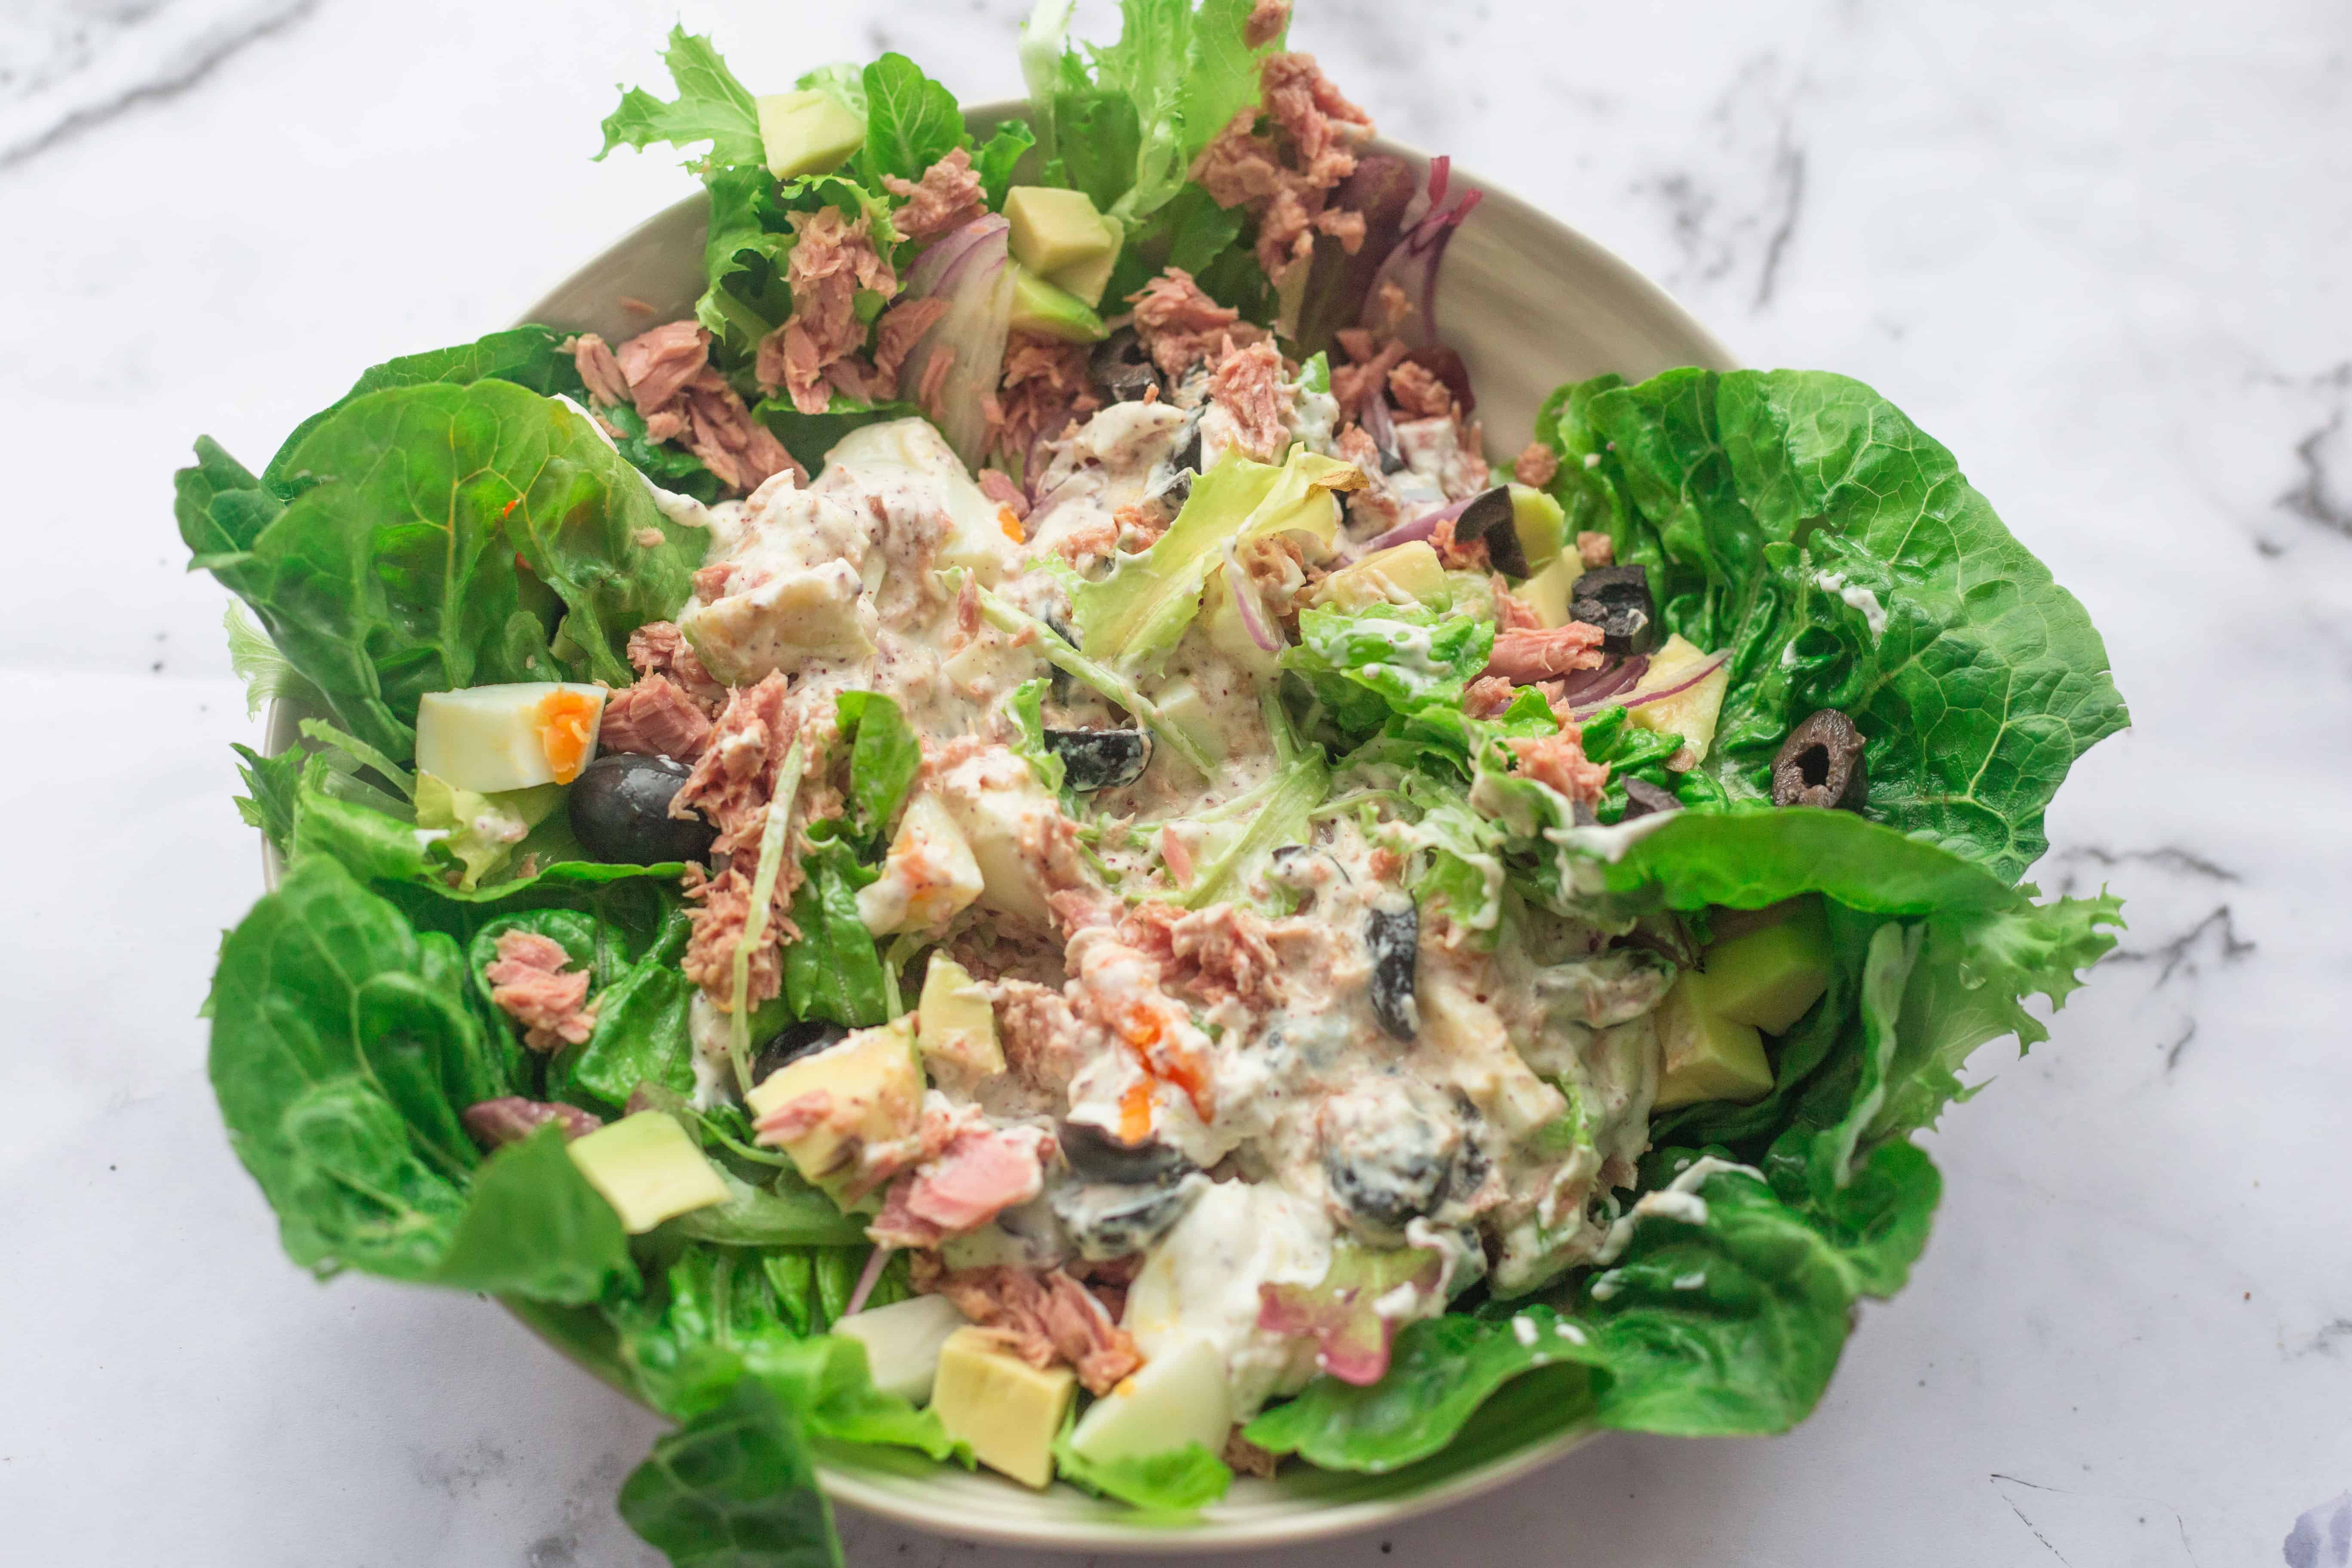 Tuna and salad with yoghurt dressing in a bowl